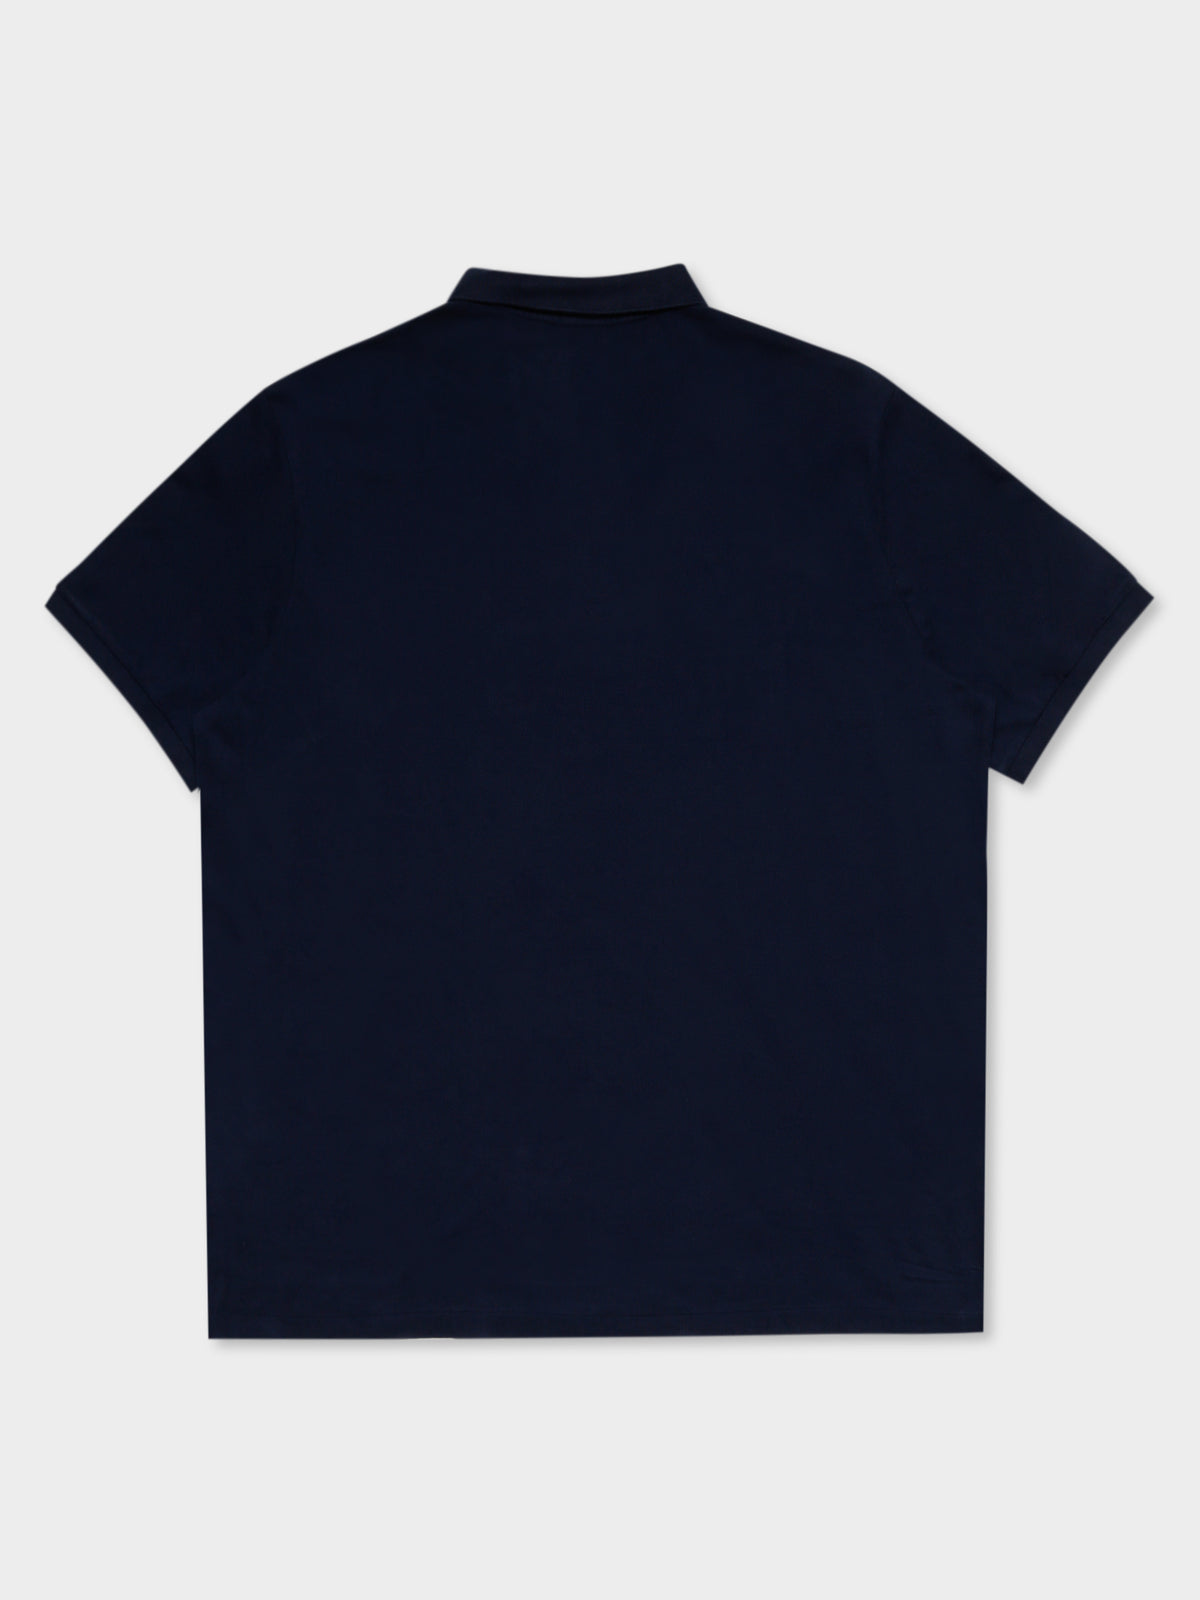 Classic Fit Mesh Polo in Newport Navy